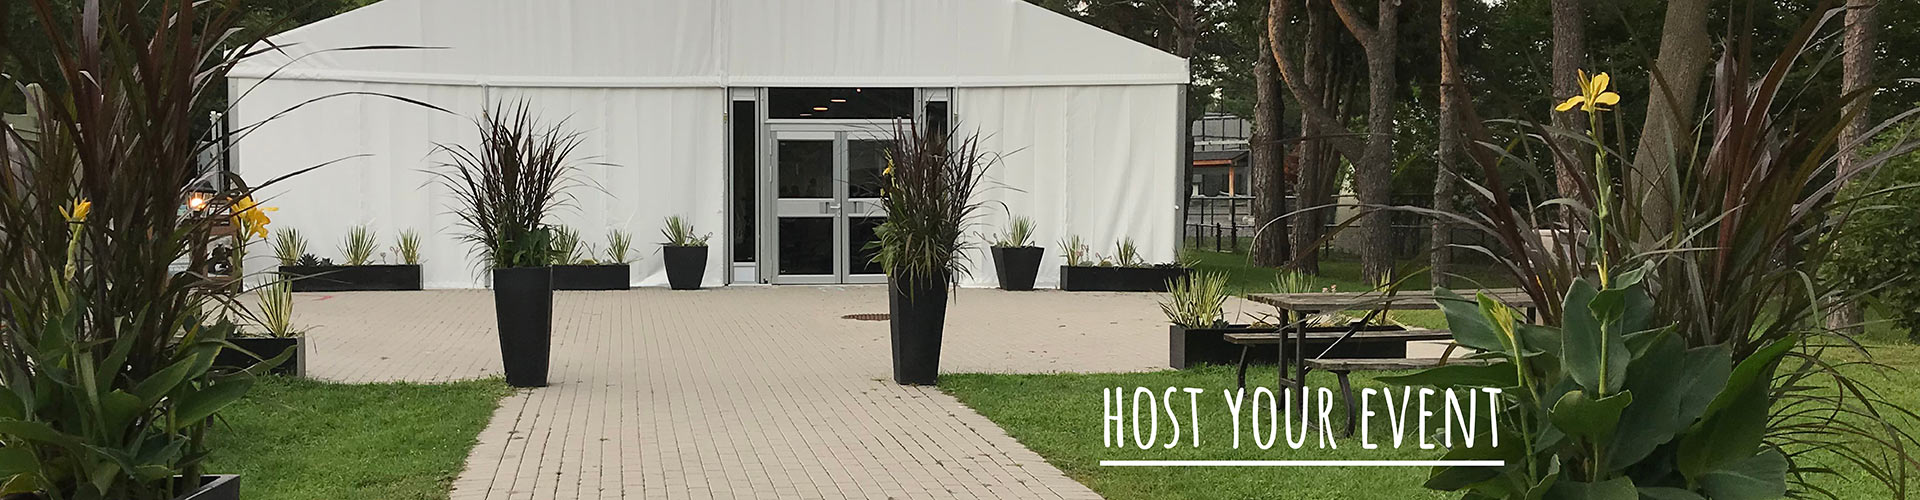 Host Your Event